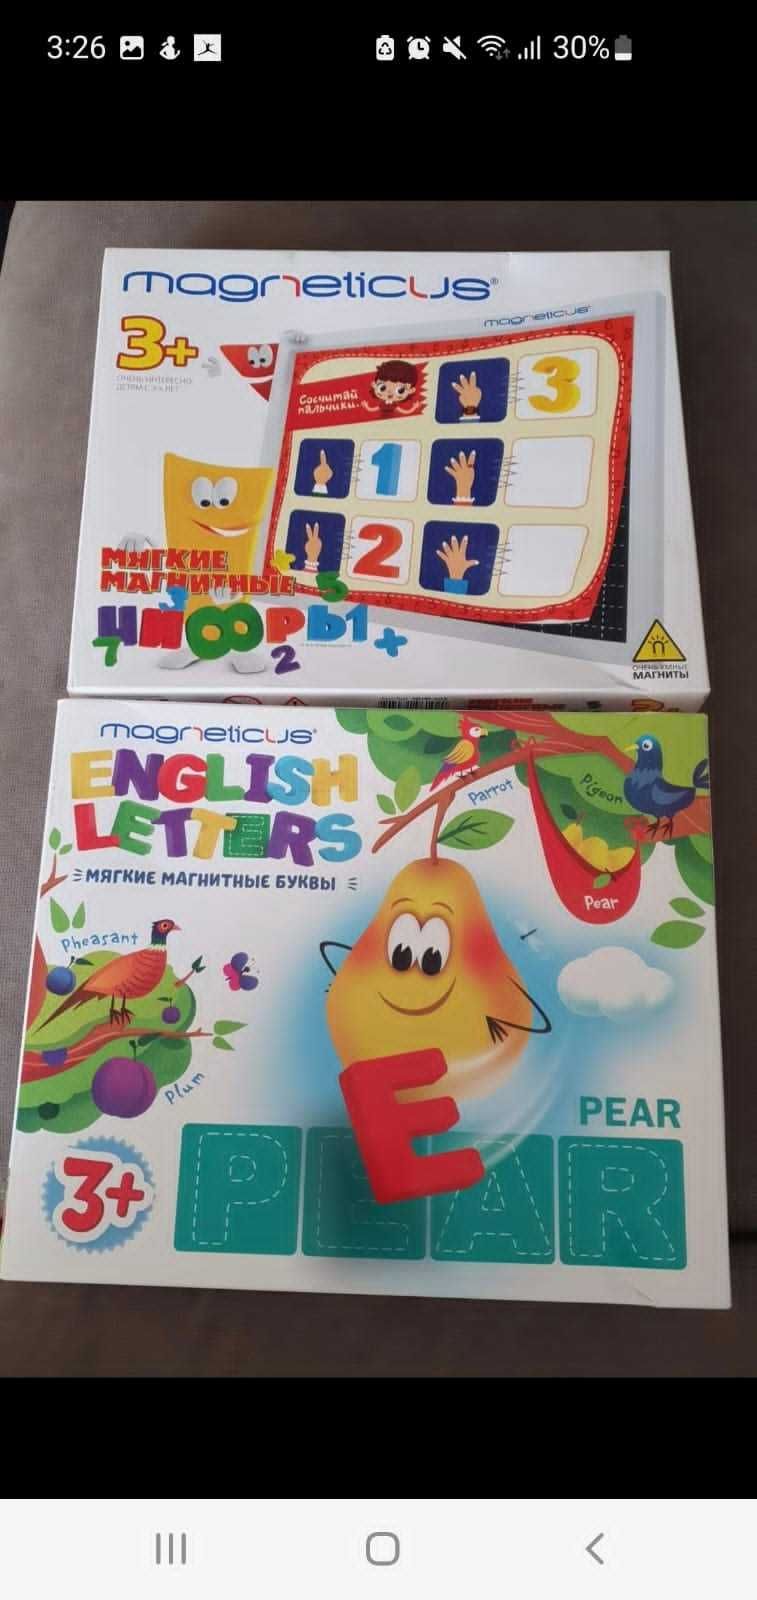 2 Magneticus childrens learning games (english & maths) for 3 years+